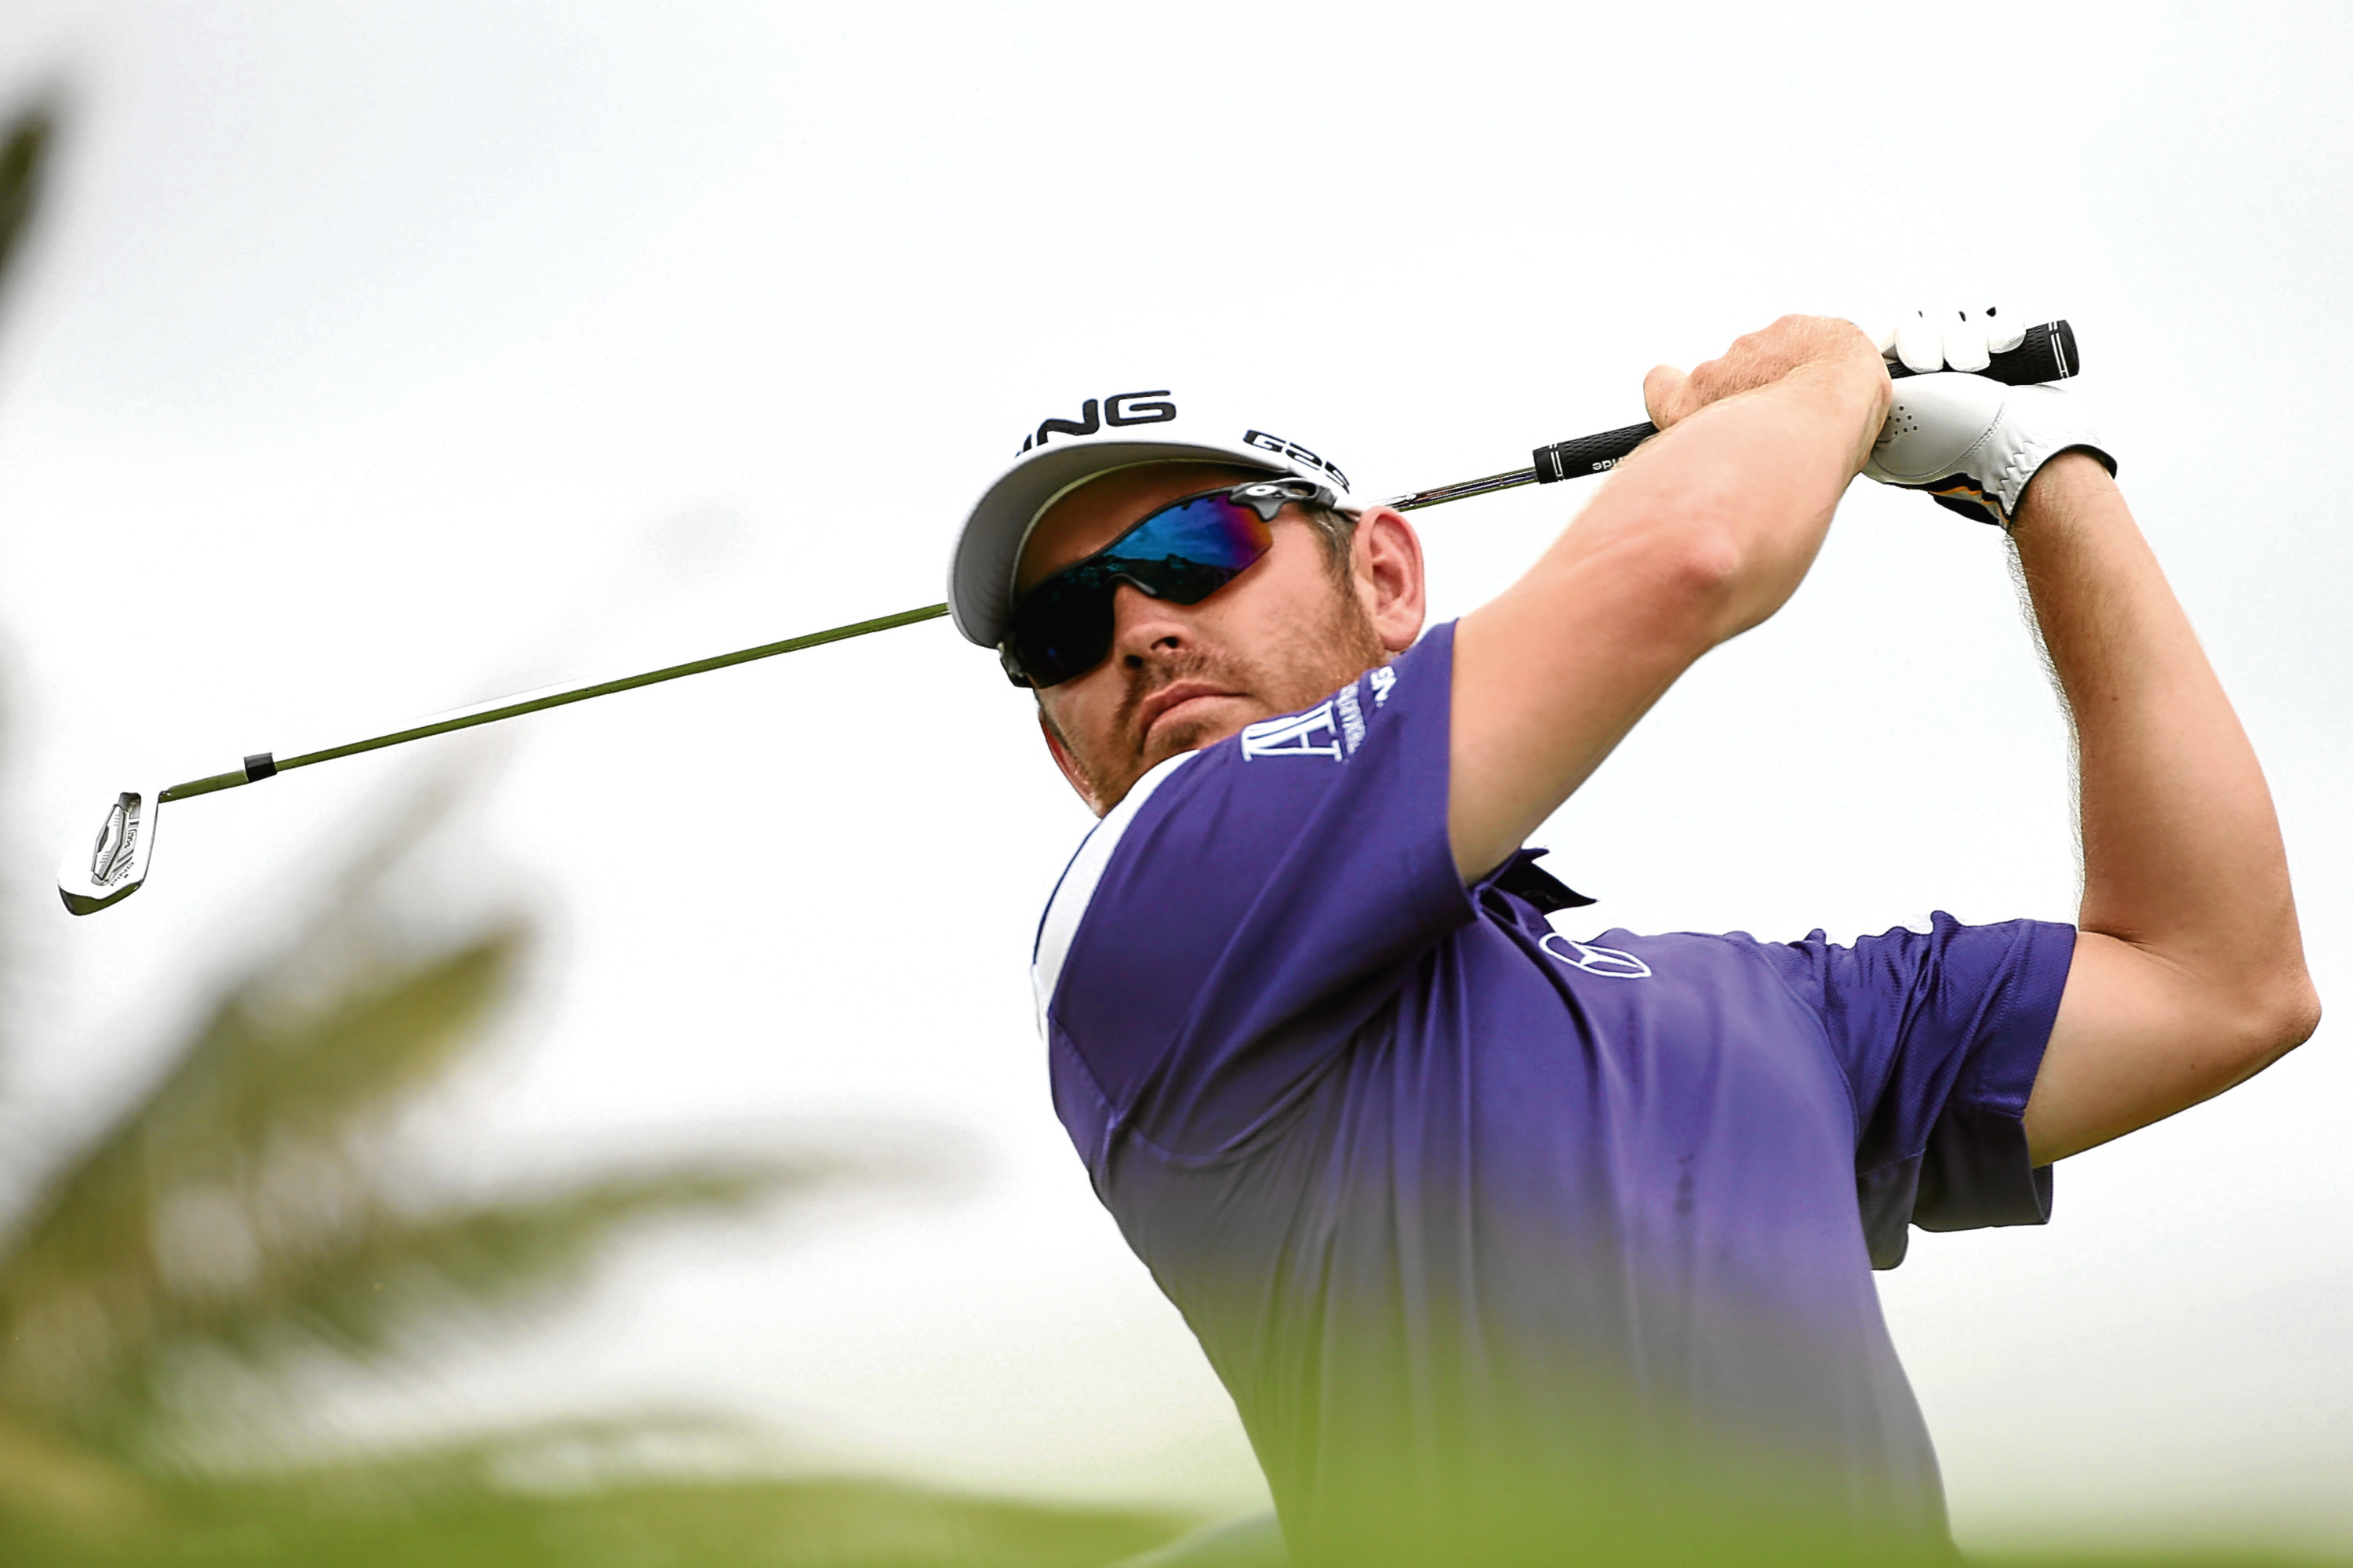 Louis Oosthuizen won the Perth International in February, but it'll be a different beast if he defends next year.